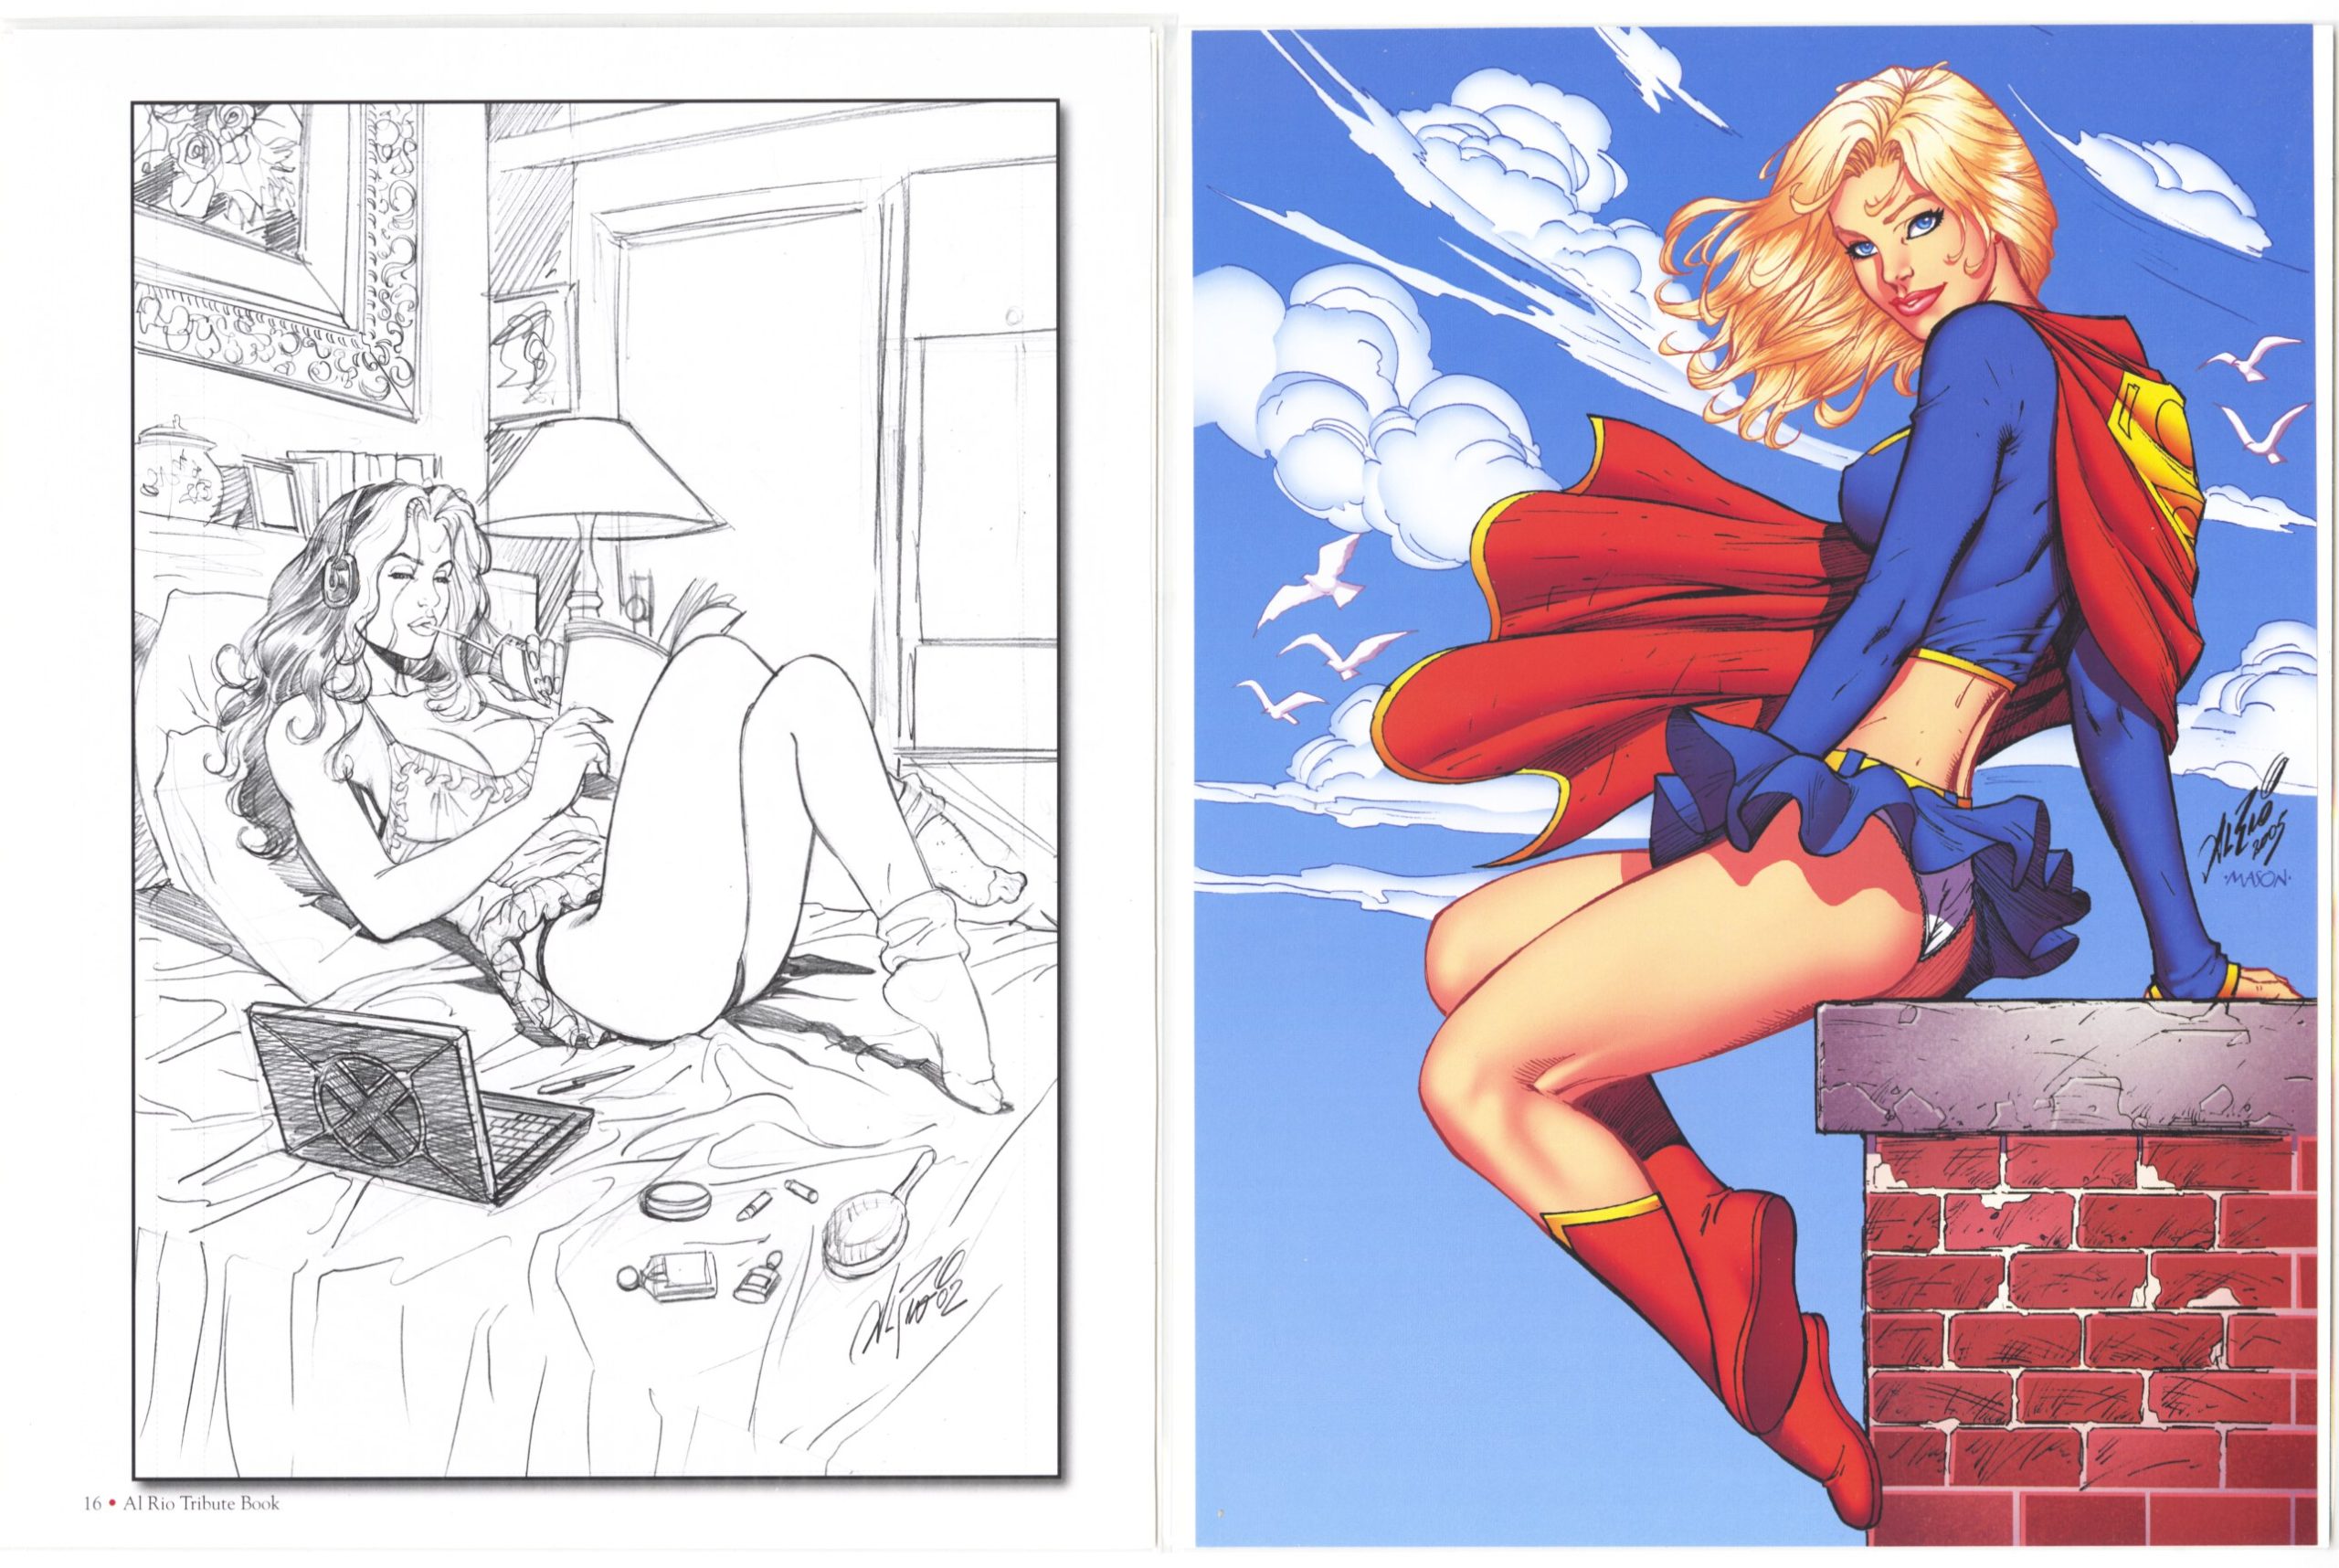 Rogue and Supergirl - Two pages inside.